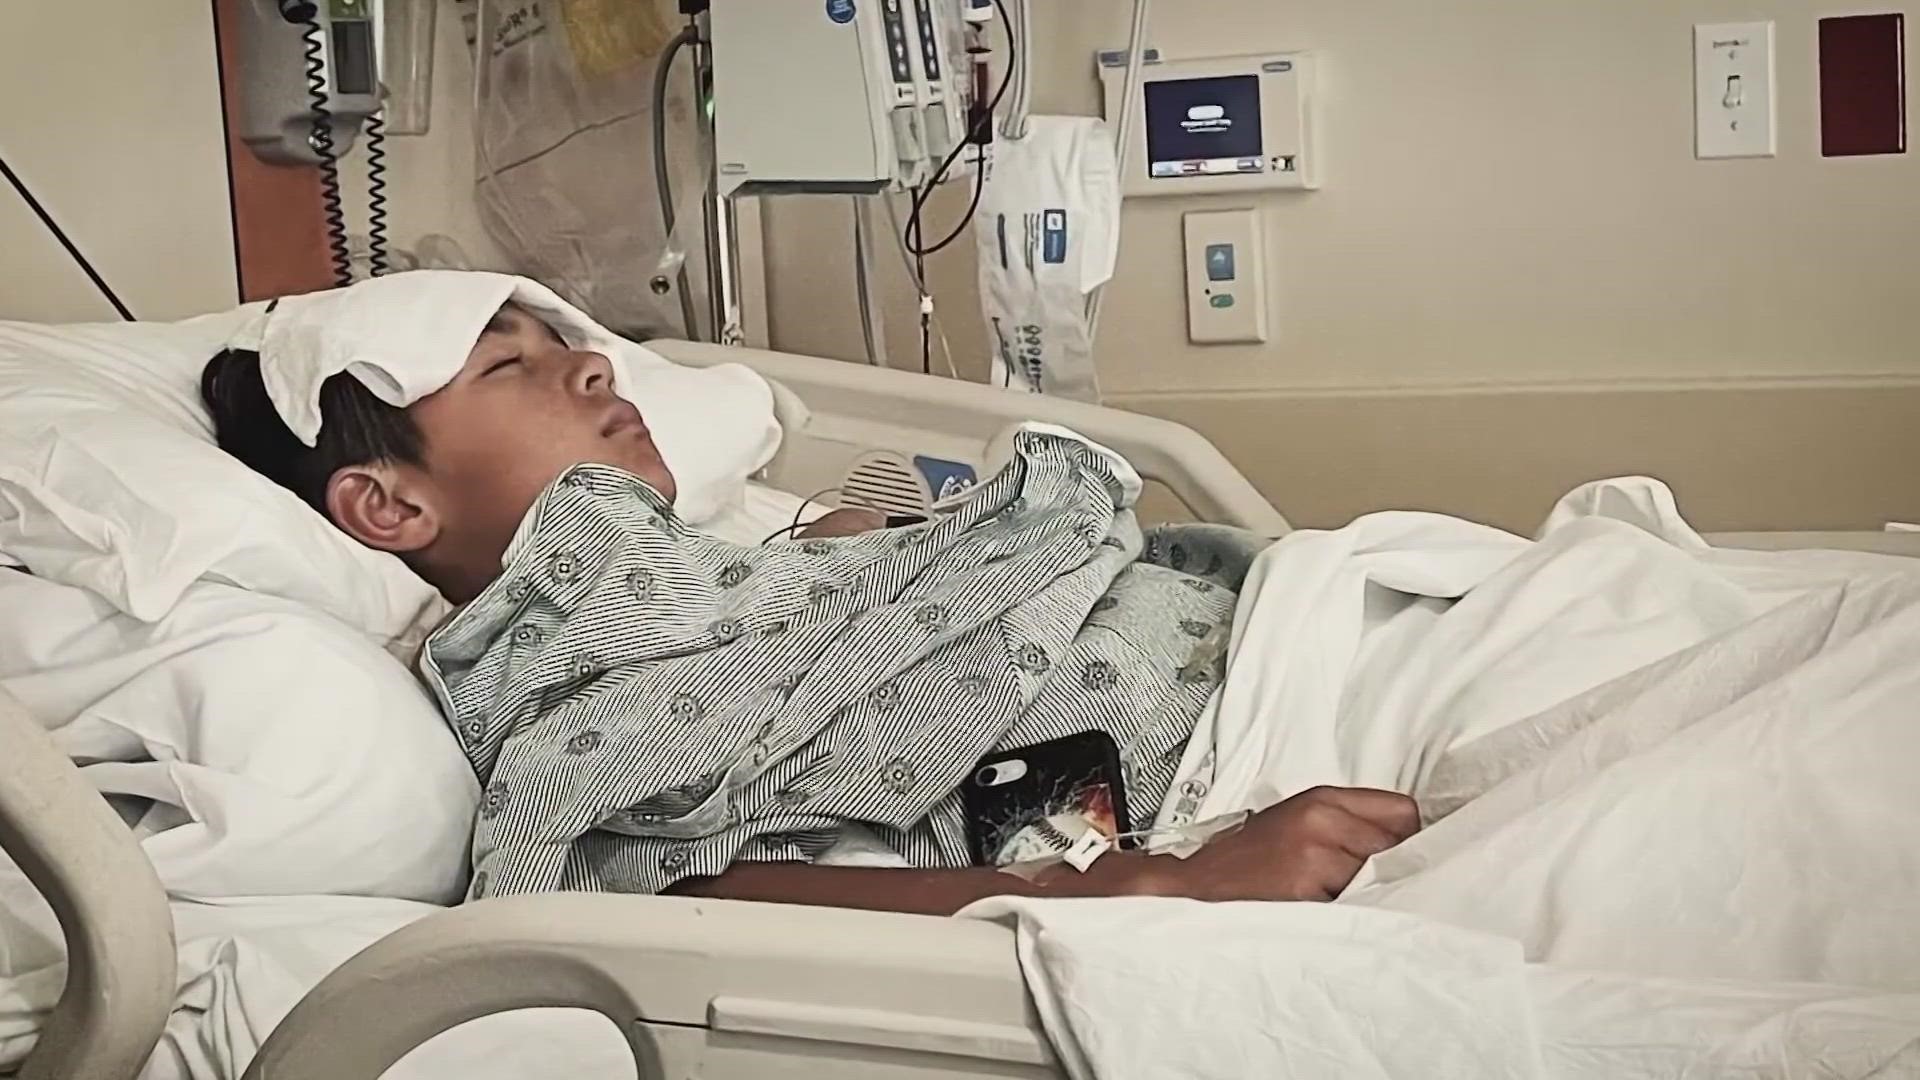 Cristian Cruz nearly had to get his leg amputated after a UTV fell on top of it. Doctors saved his leg with hyperbaric oxygen therapy.